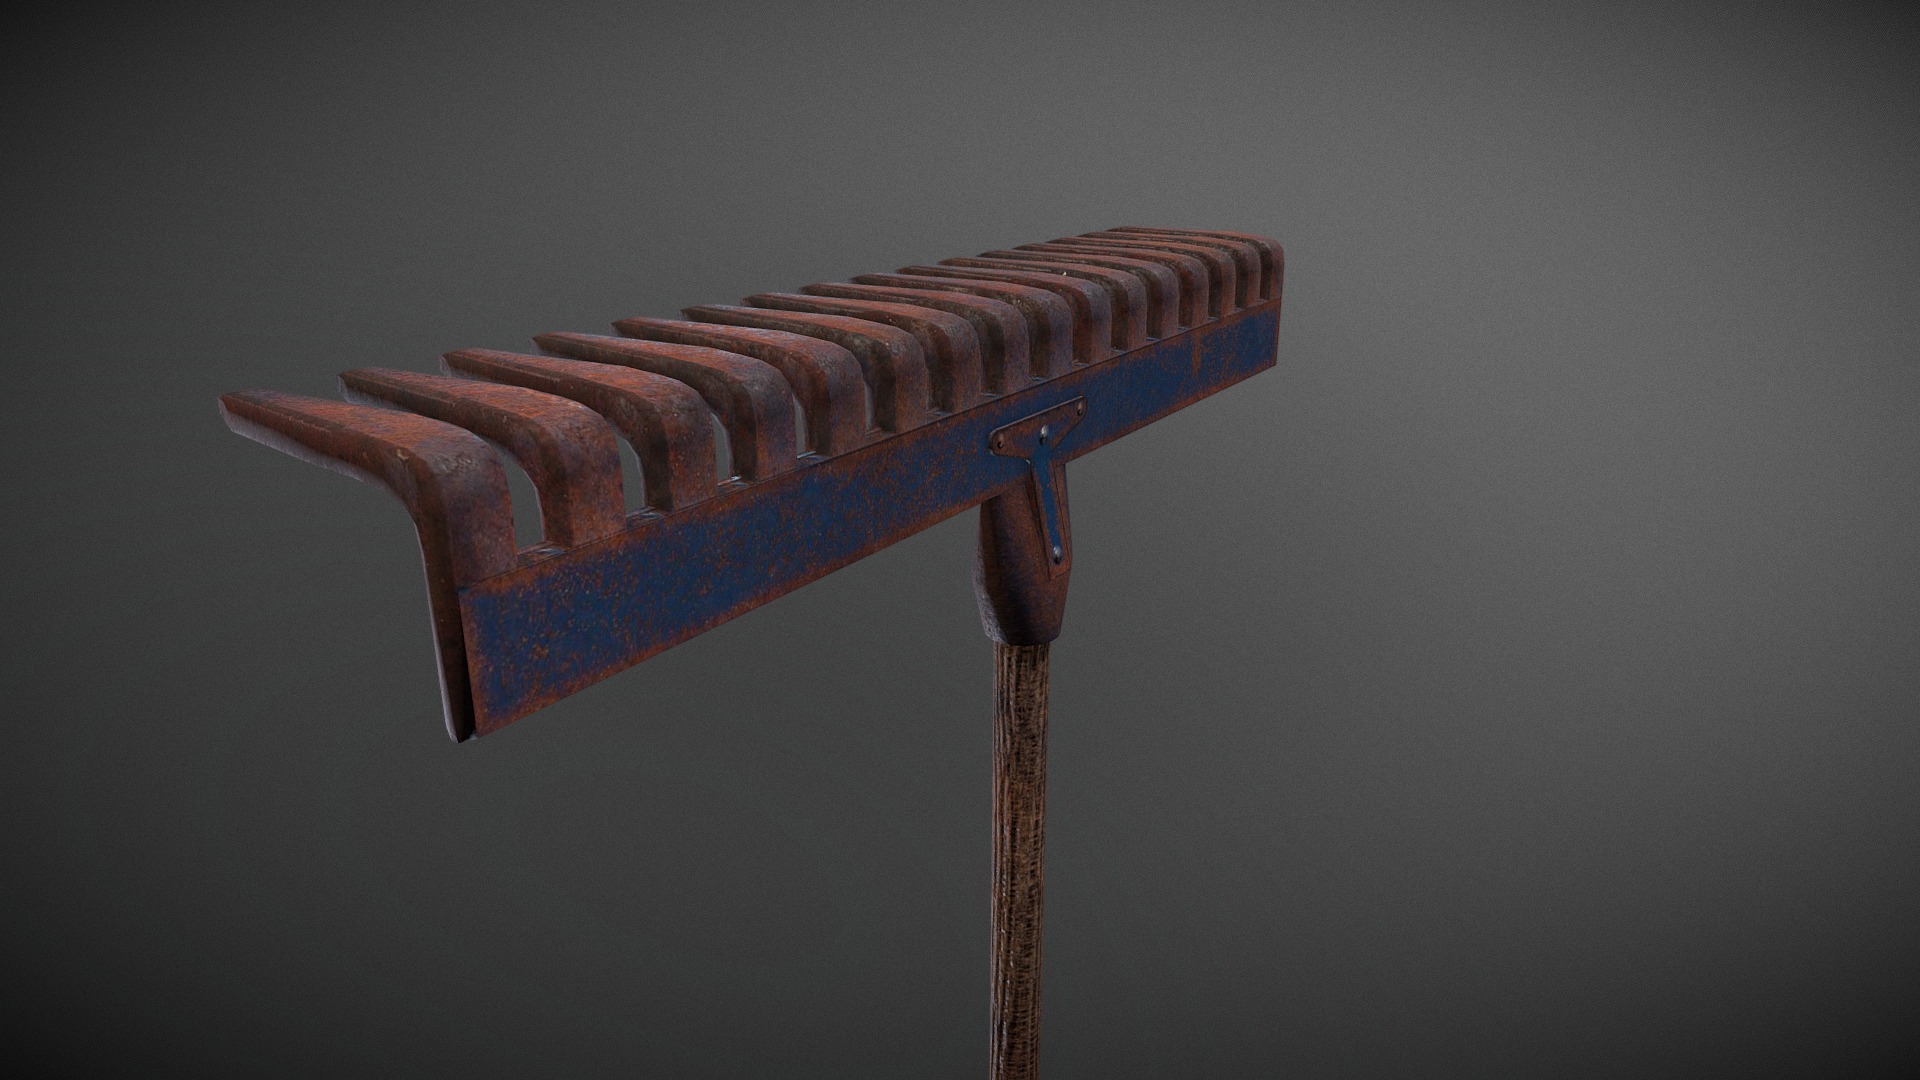 3D model Vintage Rake - This is a 3D model of the Vintage Rake. The 3D model is about a wooden chair with a blue cushion.